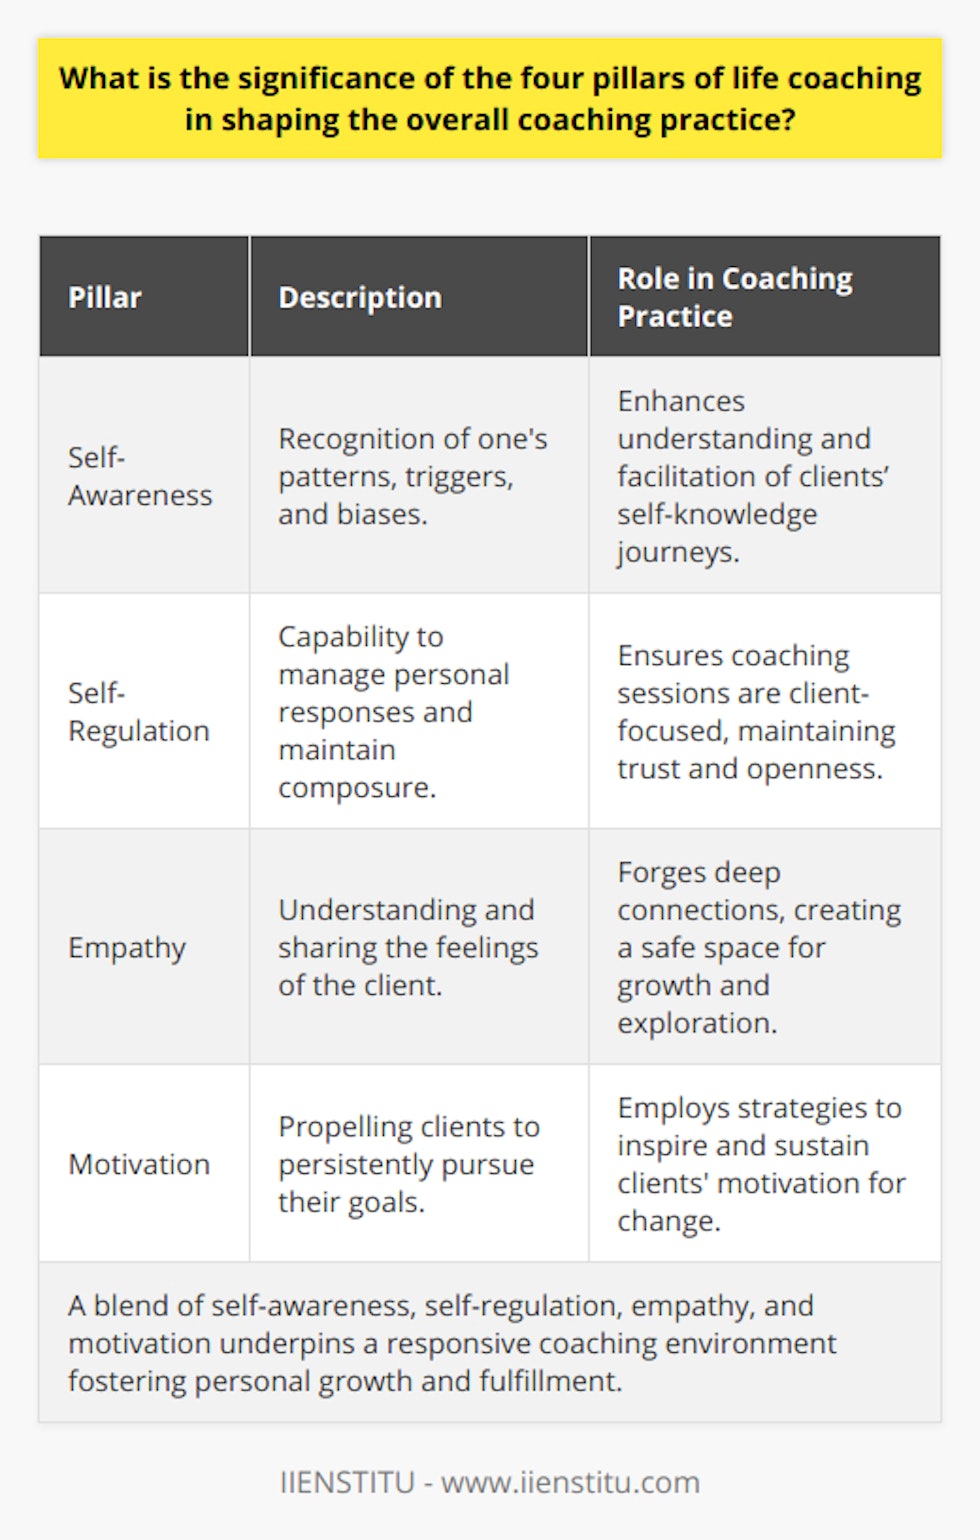 The Significance of the Four Pillars in Life CoachingLife coaching has emerged as a transformative practice that helps individuals to reach their personal and professional goals. At the core of this practice are four pillars that are fundamental to the coaching process: self-awareness, self-regulation, empathy, and motivation. When life coaches skillfully apply these pillars in their practice, they nurture a comprehensive coaching environment that prompts meaningful change and growth in their clients.Self-Awareness: The Keystone of CoachingSelf-awareness is the keystone of effective life coaching. Coaches who cultivate their own self-awareness are better equipped to understand and facilitate their clients' journeys toward greater self-knowledge. This element is about recognizing personal patterns, triggers, and biases which could impact the coaching relationship. Self-awareness extends to comprehending the client's world view and respecting their unique perspective, which enhances the coach's ability to tailor their approach to individual clients.Self-Regulation: Maintaining the Coaching EquilibriumSelf-regulation refers to the coach’s ability to manage their own responses and maintain composure during coaching sessions. This self-mastery ensures that the coach’s personal feelings or opinions do not overshadow the client's needs. By exemplifying self-regulation, coaches can deal with challenging situations calmly and constructively, thereby upholding an atmosphere of trust and encouraging clients to explore their issues without fear of judgment or reactivity from the coach.Empathy: Connecting on a Deeper LevelEmpathy involves understanding and sharing the feelings of others and is a cornerstone of the coaching relationship. A coach with a well-developed sense of empathy can forge a deep connection with their clients. This connection is essential for creating a safe and nurturing space where clients feel genuinely heard and validated. An empathetic coach navigates the delicate balance of offering support while challenging clients to move beyond their comfort zones.Motivation: Igniting the Spark of ChangeFinally, motivation acts as the catalyst that propels clients toward action. A crucial part of a coach's role is to help clients find and sustain the motivation needed to pursue their goals persistently. Coaches employ various strategies to boost motivation, including setting clear and achievable goals, offering encouragement, and keeping clients accountable. This pillar is about not only inspiring clients but also helping them to uncover their intrinsic motivators that drive lasting change.In essence, the four pillars of life coaching—self-awareness, self-regulation, empathy, and motivation—are not just isolated concepts but are intricately woven into the fabric of effective coaching. They enable coaches to create a dynamic and responsive coaching environment that respects and reacts to the needs of the client. Through these pillars, life coaching moves beyond simple goal-setting and problem-solving, transforming it into a holistic journey that encompasses personal growth, learning, and fulfillment, which is at the heart of the coaching philosophy endorsed by institutions like IIENSTITU, which aim to foster these core values in their life coaching curriculums.